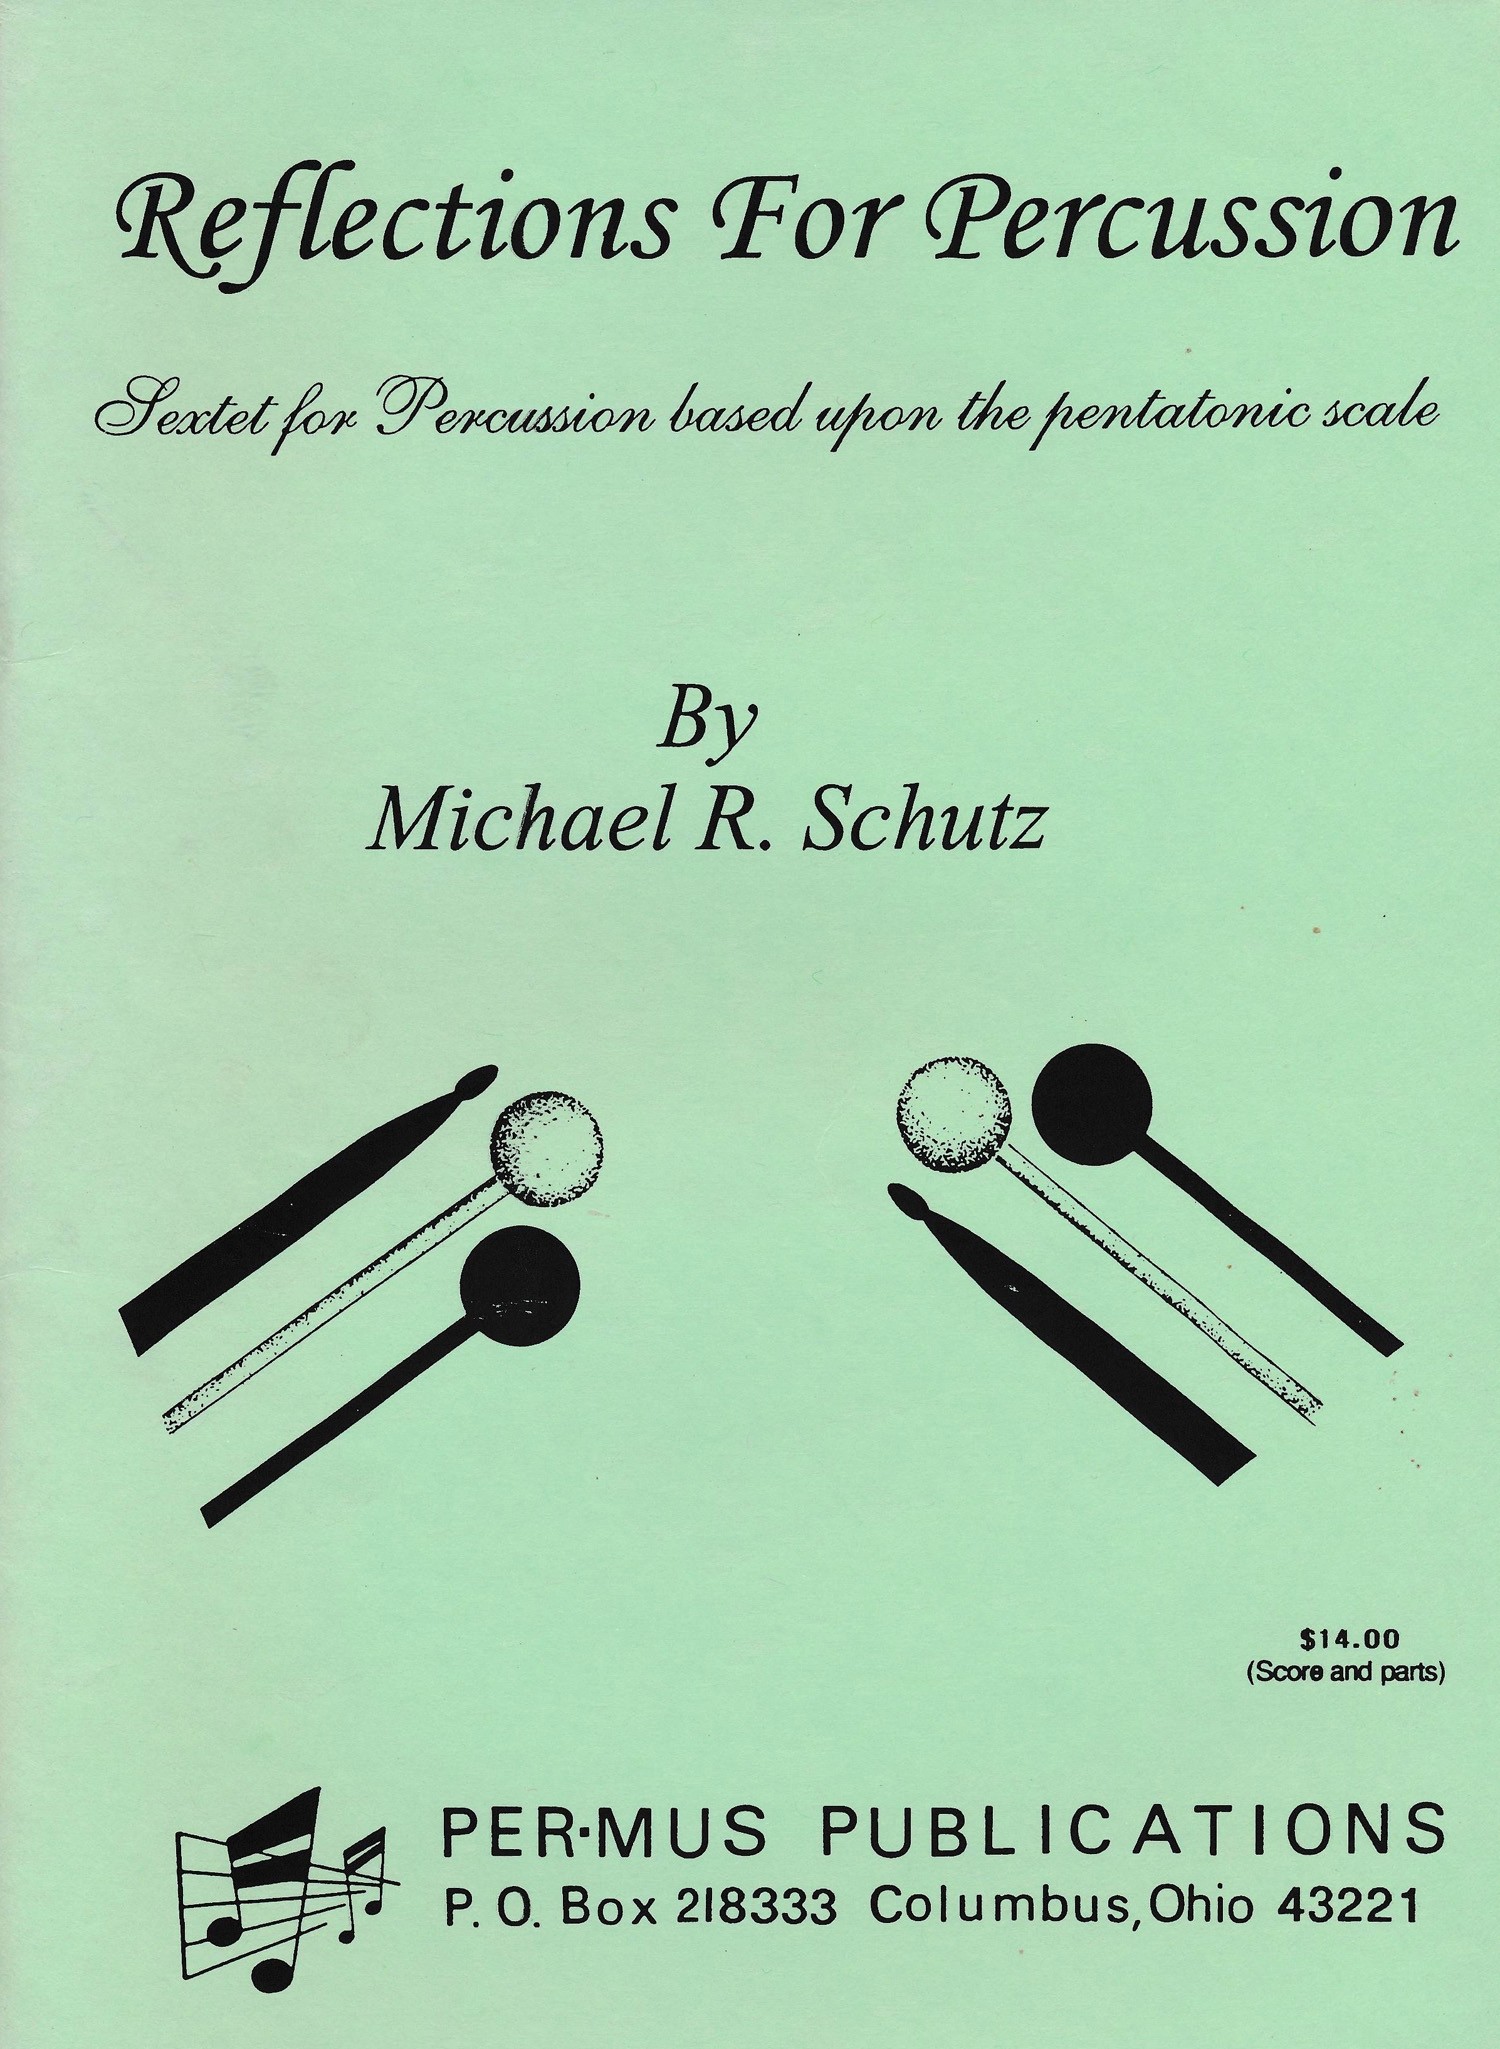 Reflections For Percussion by Michael Schutz